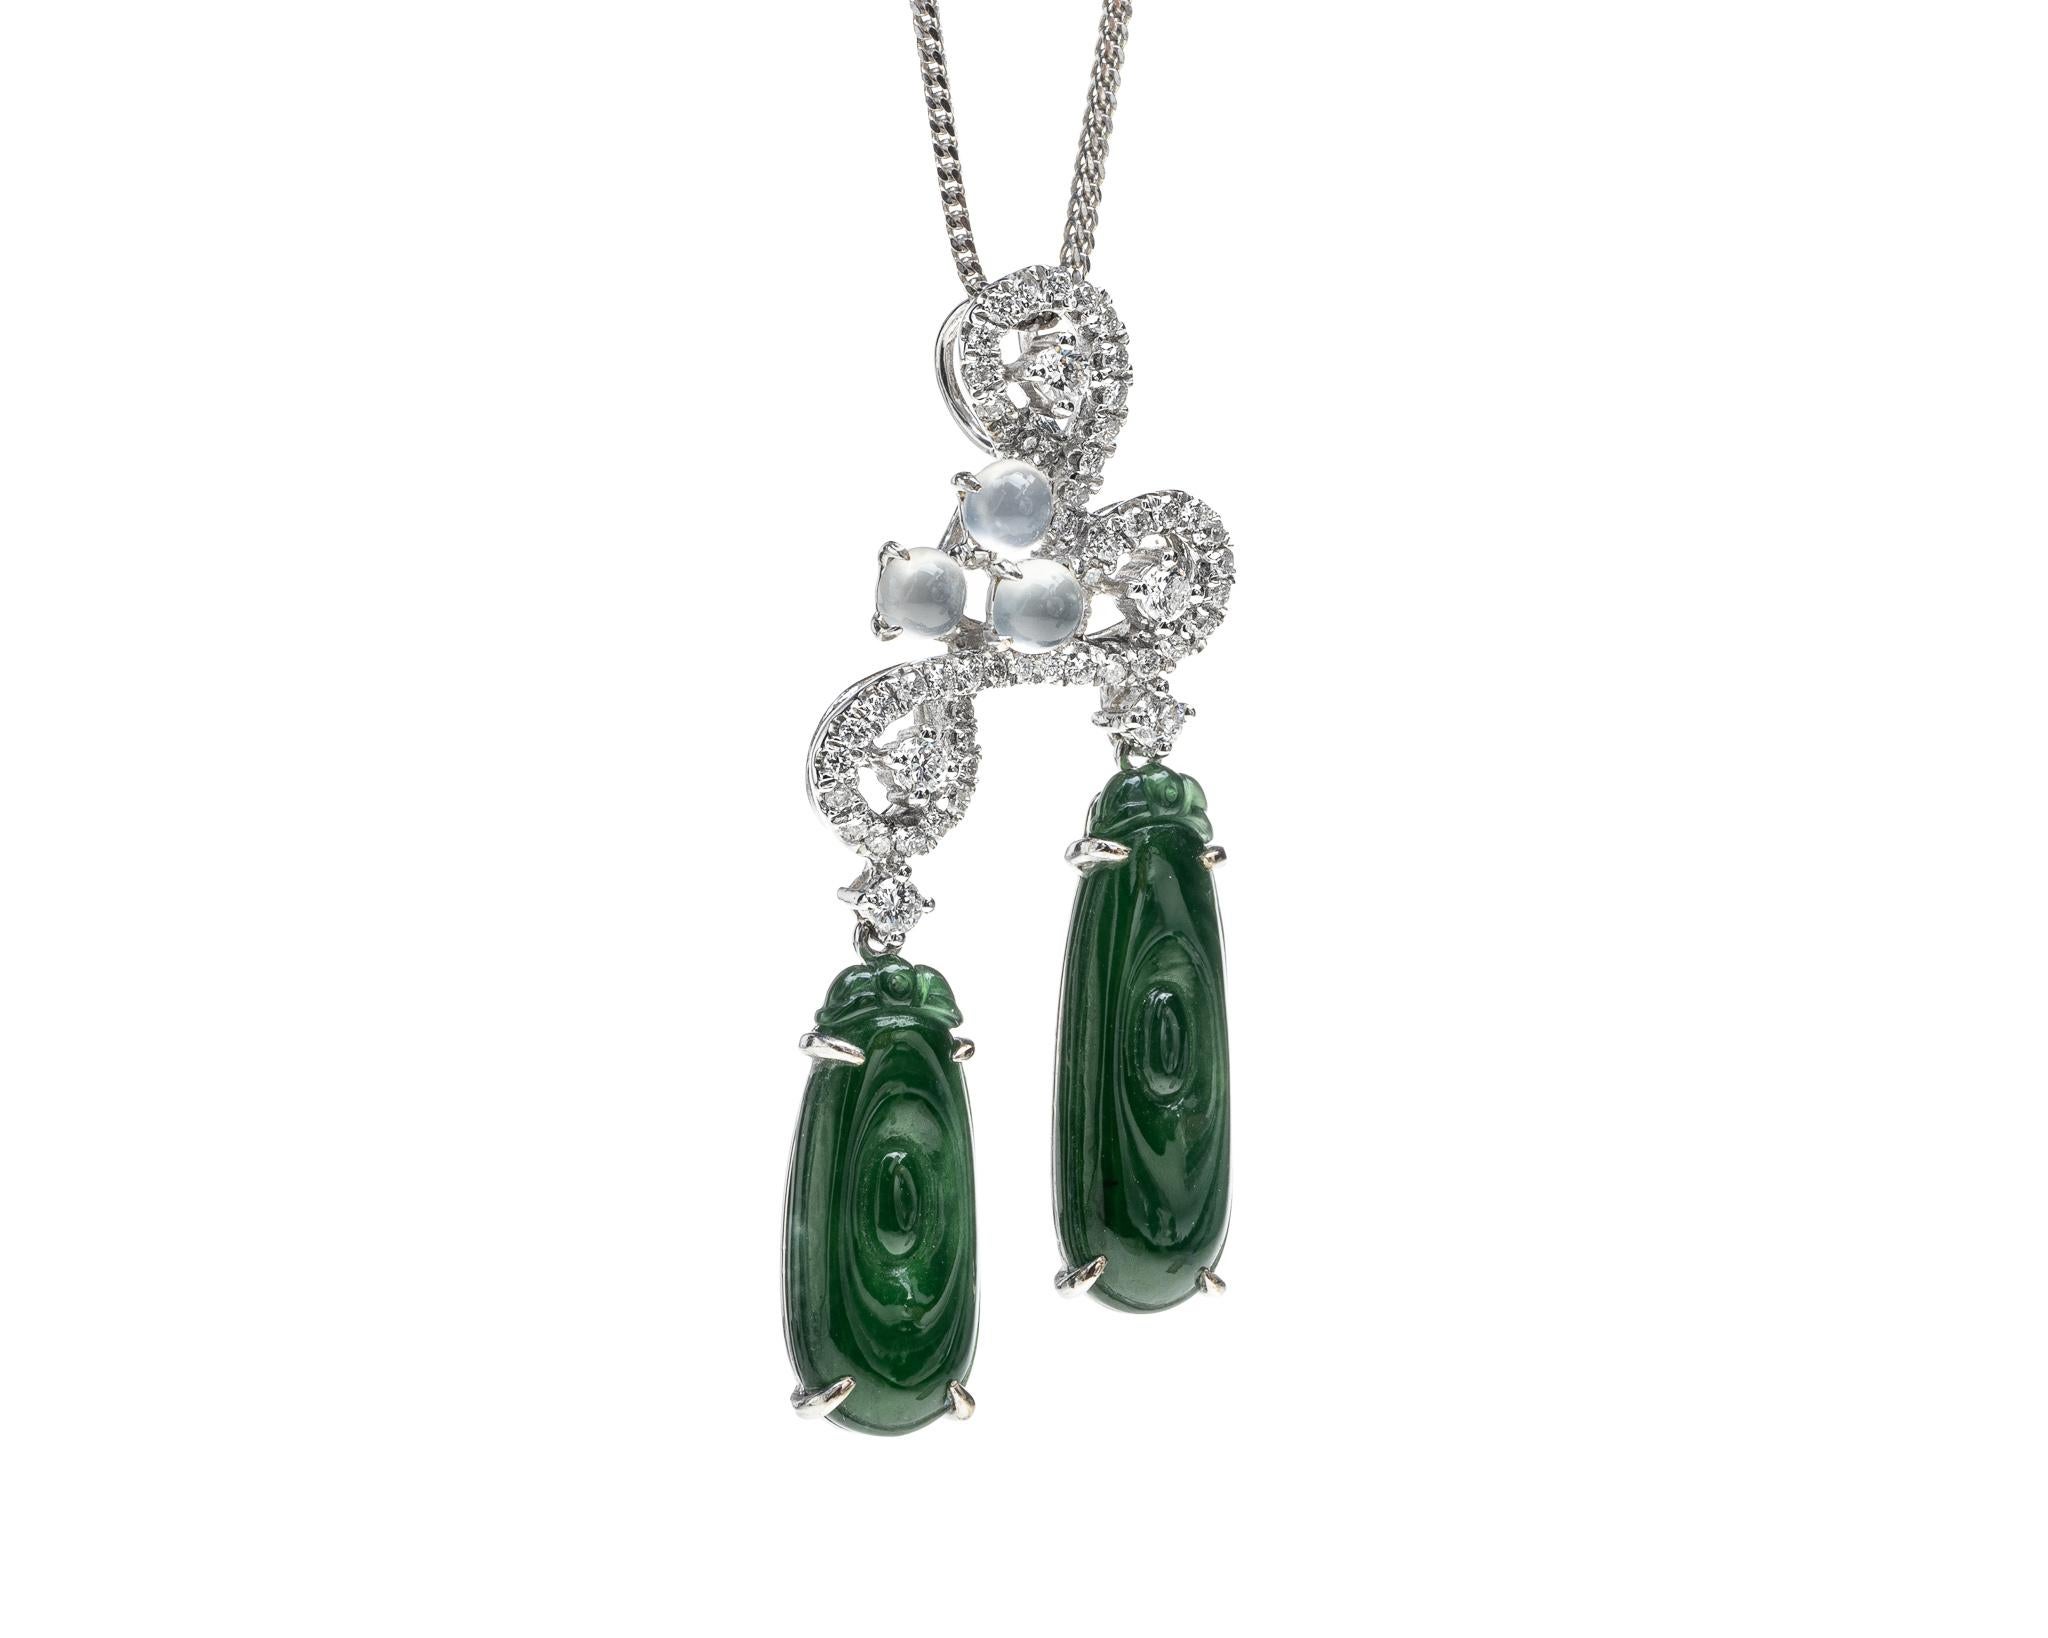 This is an all natural, untreated jadeite jade carved ancient gold coin pendant set with icy jadeite jade stones on a 18K white gold and diamond bail.  The carved ancient gold coin symbolizes money, wealth and prosperity.
   
It measures 1.66 inches